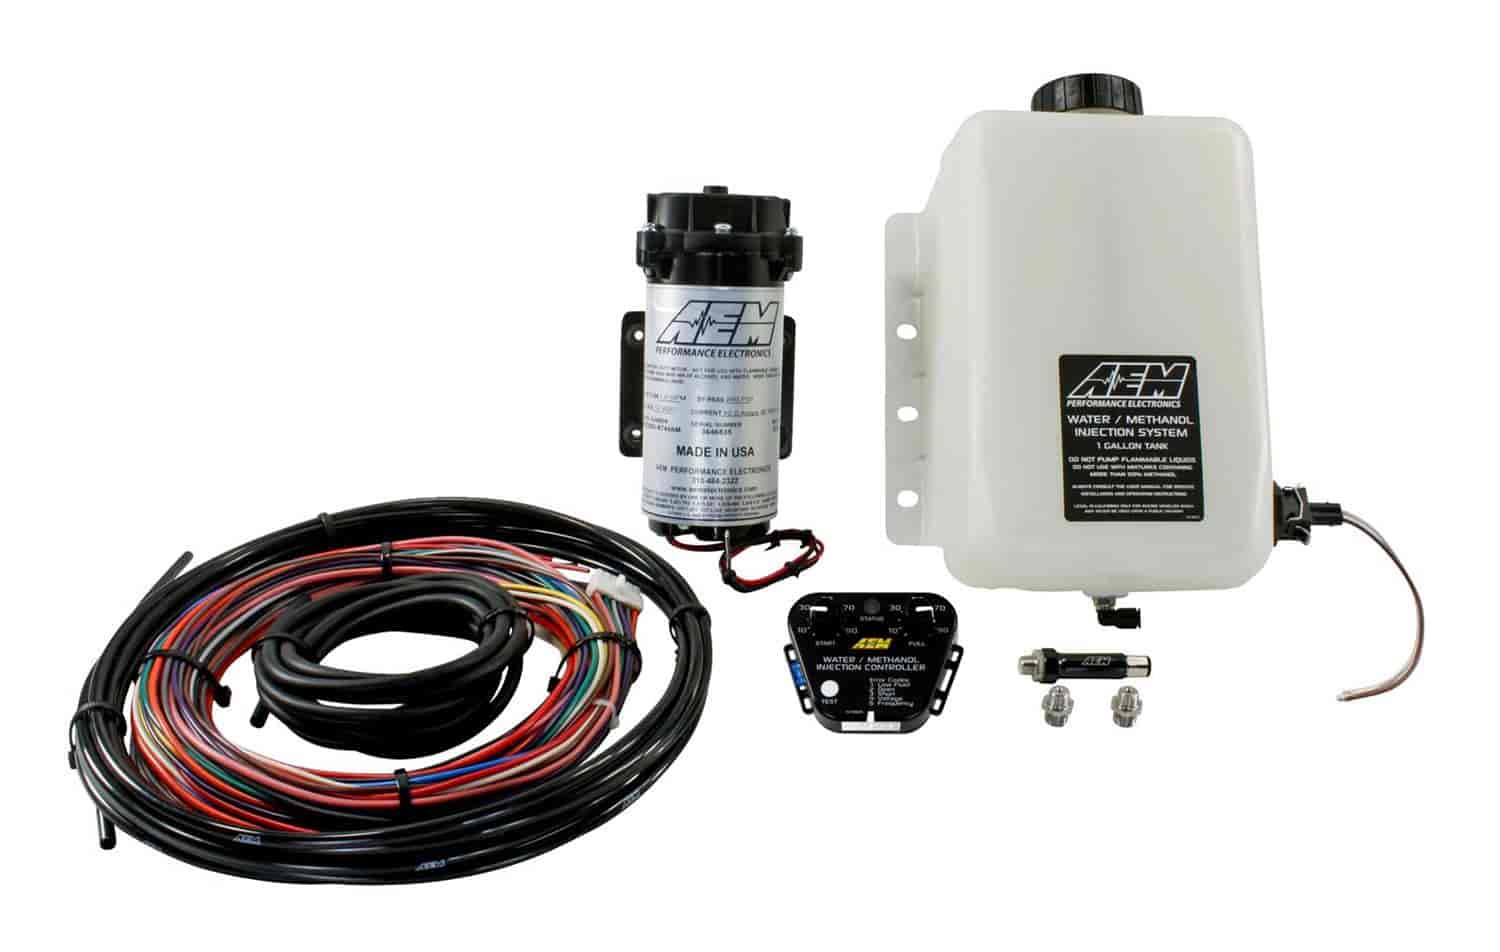 V2 Water/Methanol Injection Kit Includes: Multi Input Controller For Over 35psi